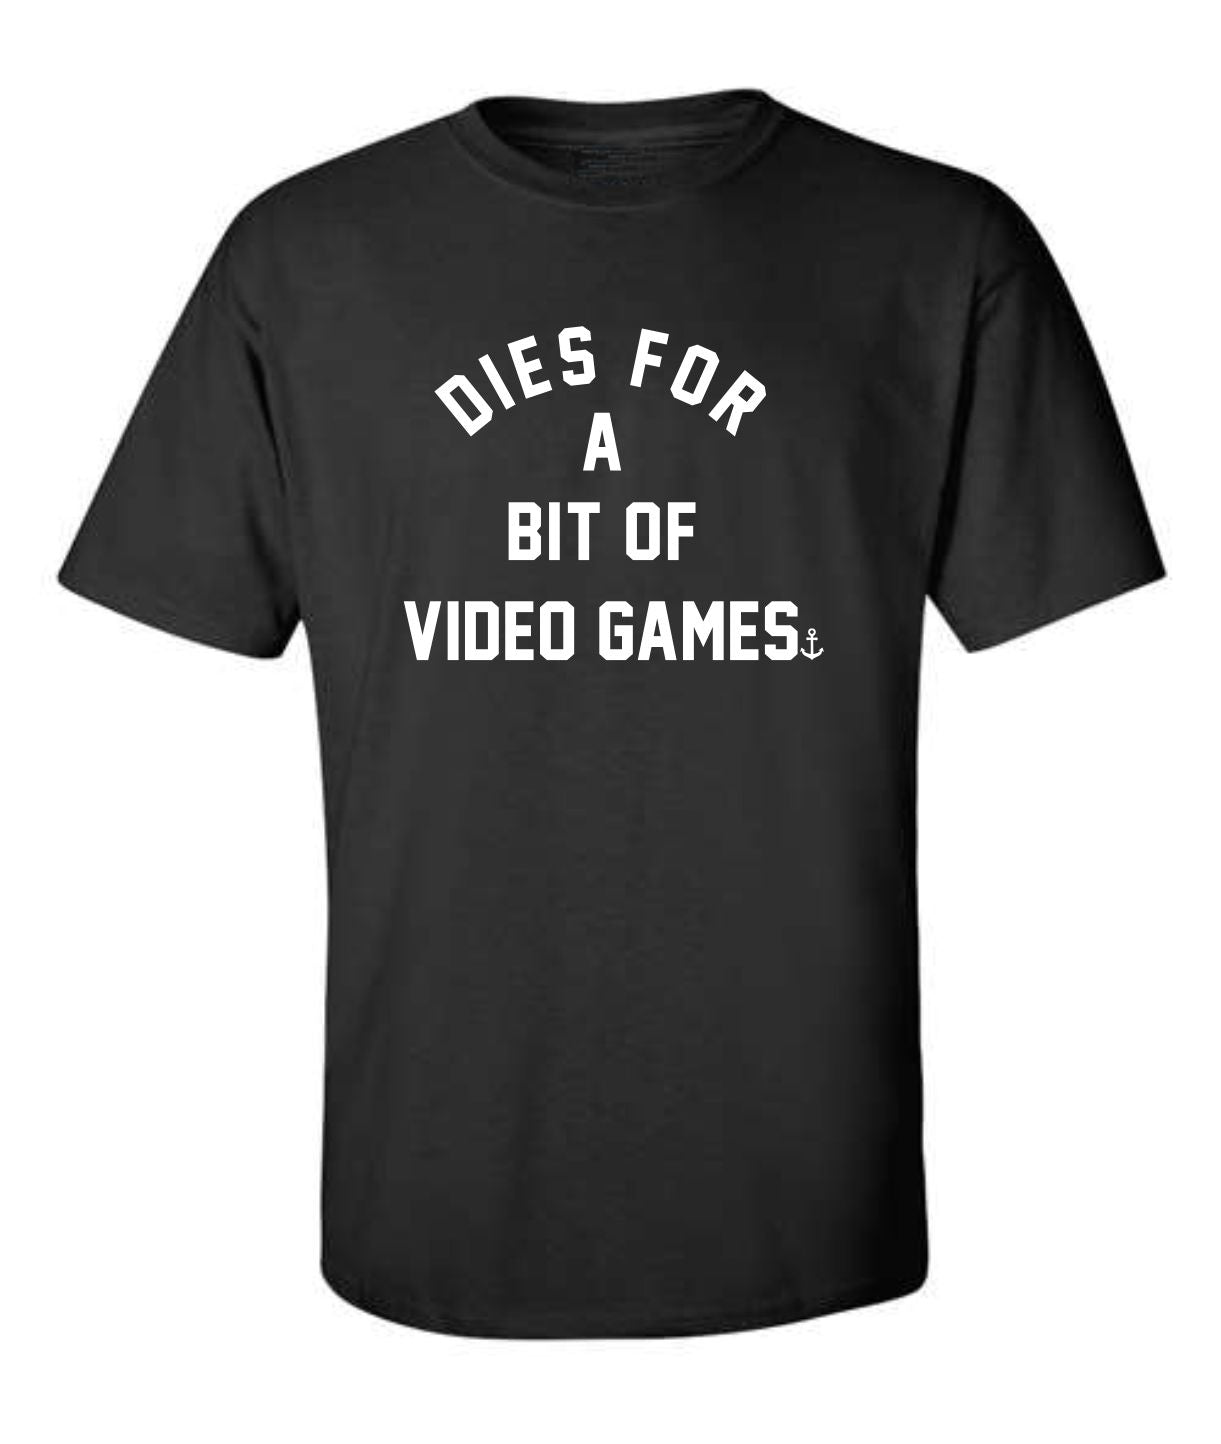 "Dies For A Bit Of Video Games" T-Shirt